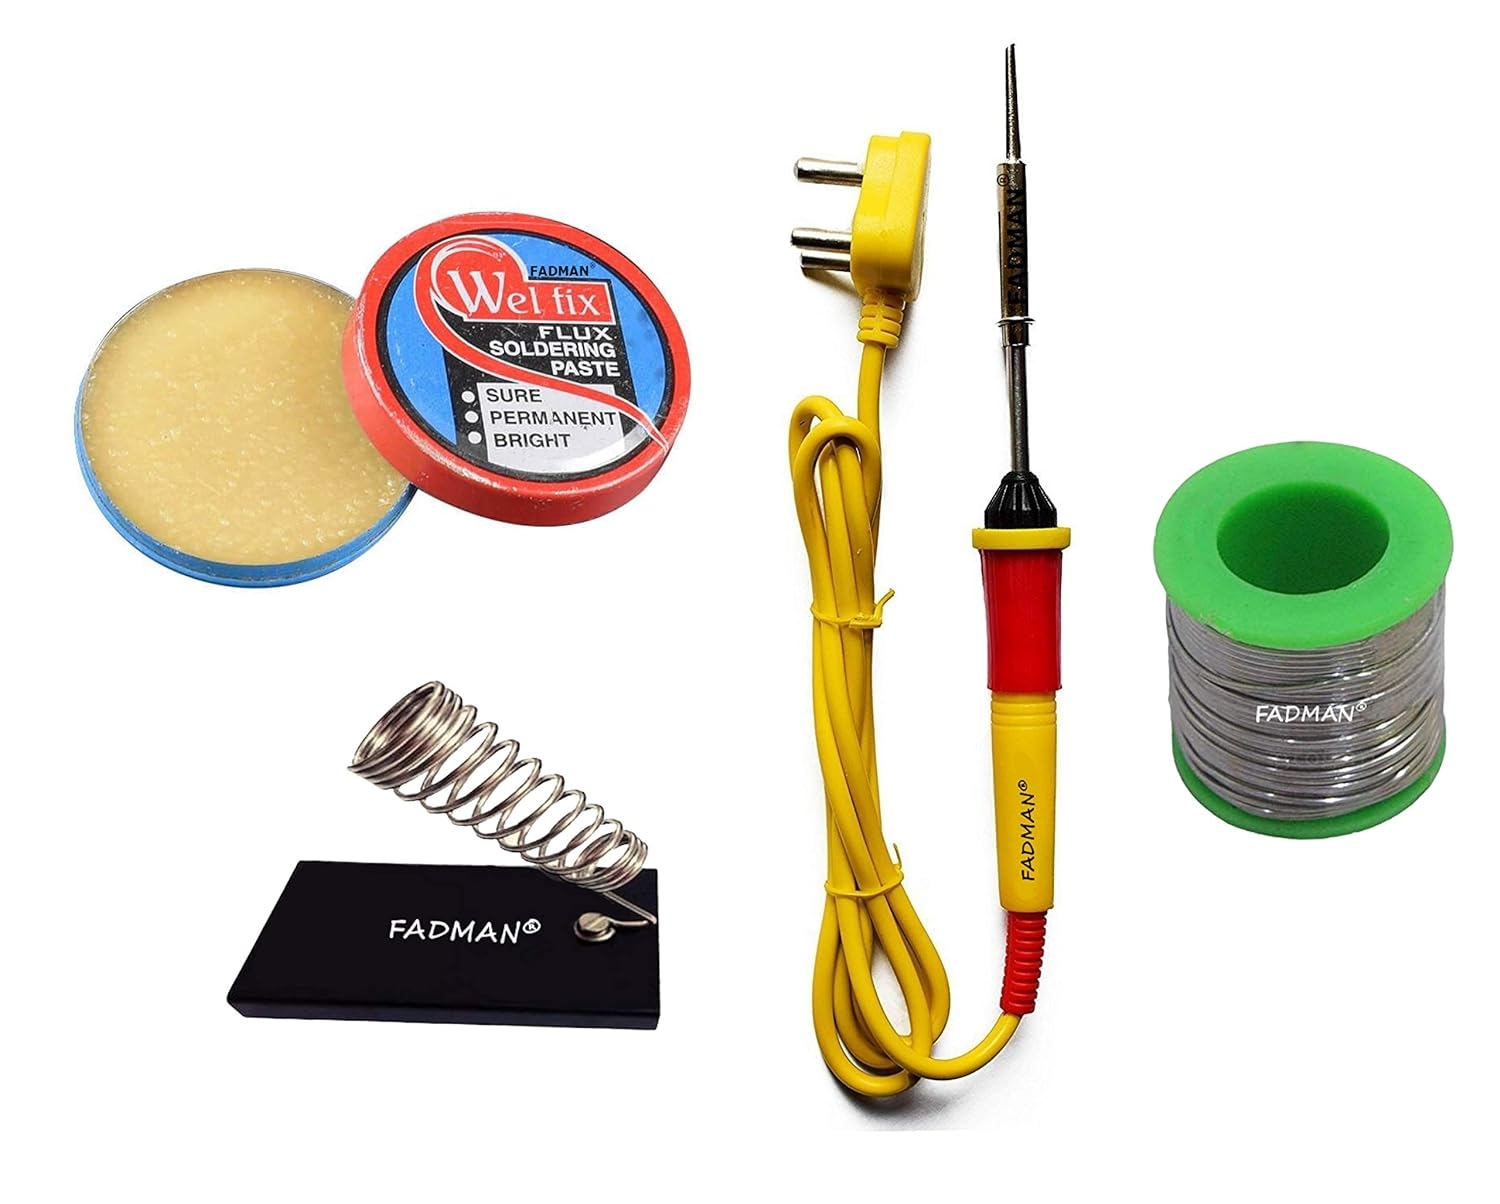 FADMAN BASIC COMPLETE KIT TYPE-4 SOLDERING IRON KIT | SOLDER WIRE | YELLOW SOLDERING IRON |Corded Electric